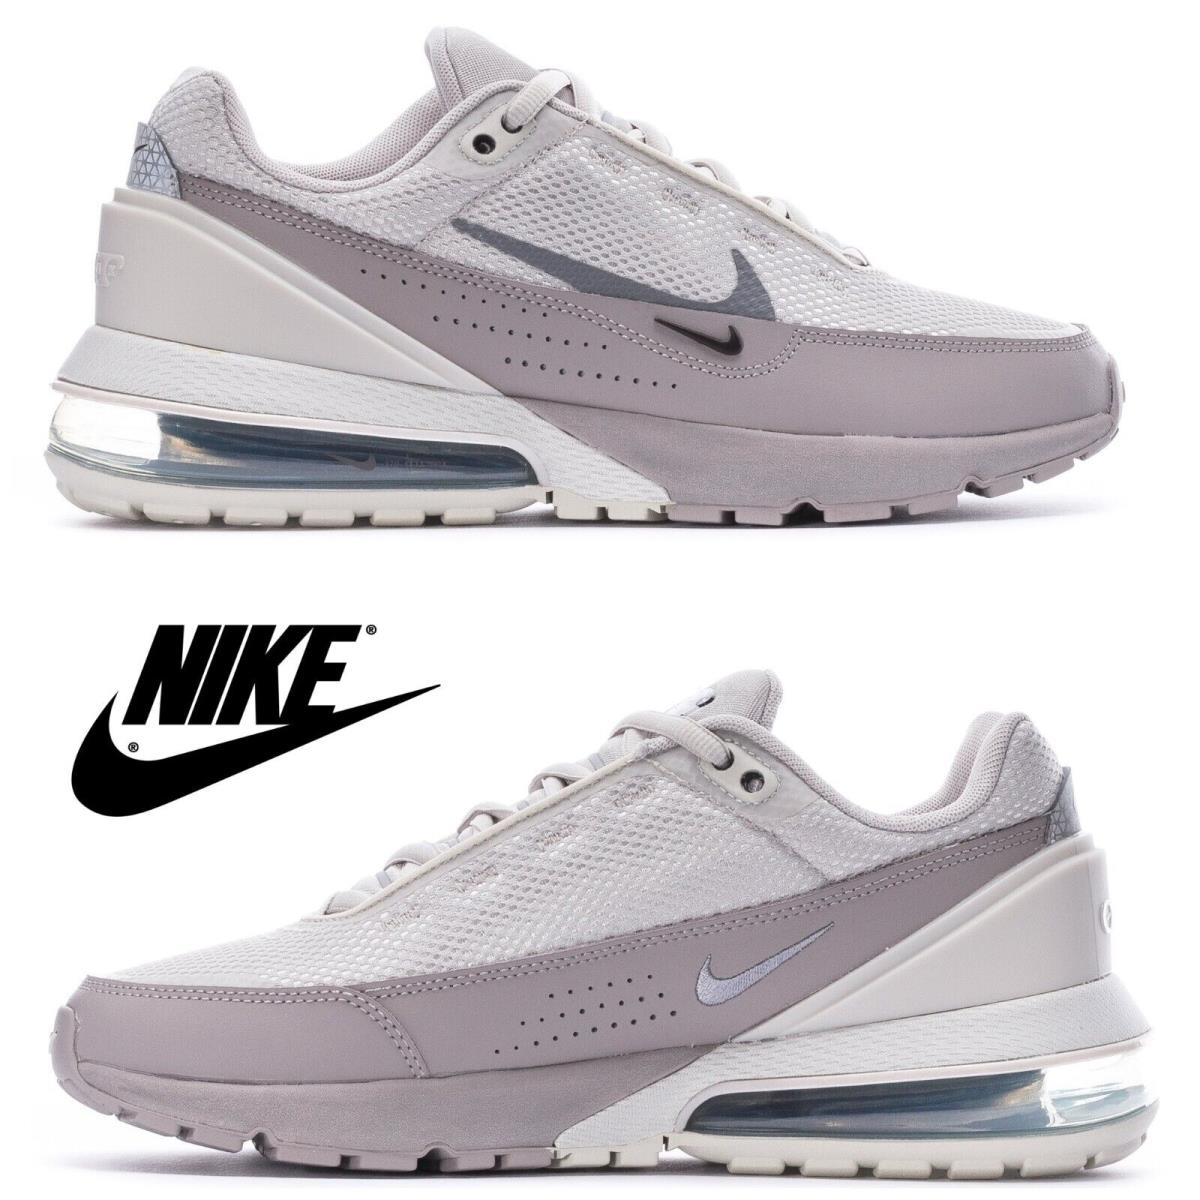 Nike Air Max Pulse Men`s Sneakers Comfort Casual Sport Running Shoes Gray - Gray, Manufacturer: Light Bone/Particle Grey/College Grey